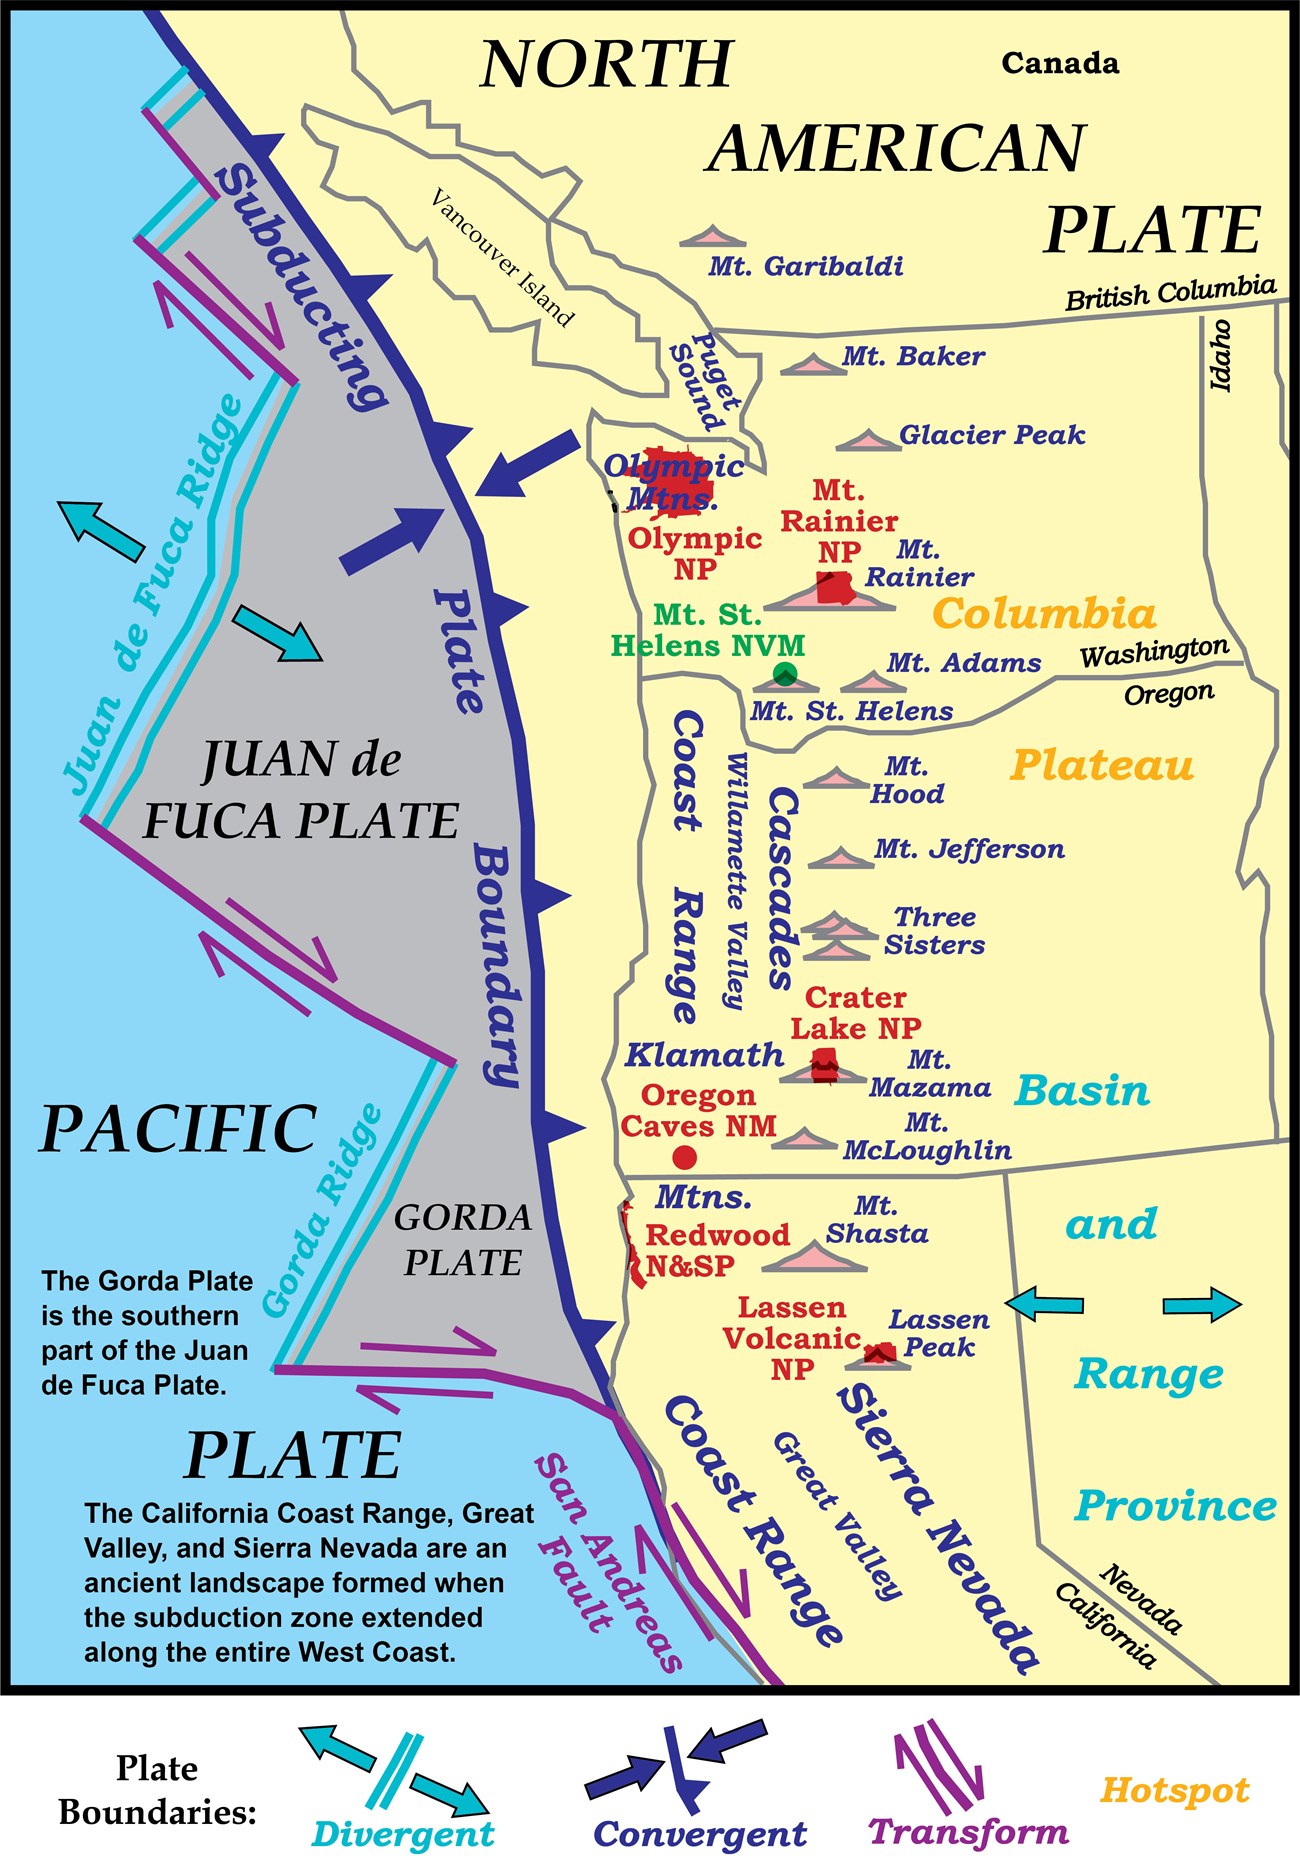 map of the northwest united states showing tectonic plates and volcanoes